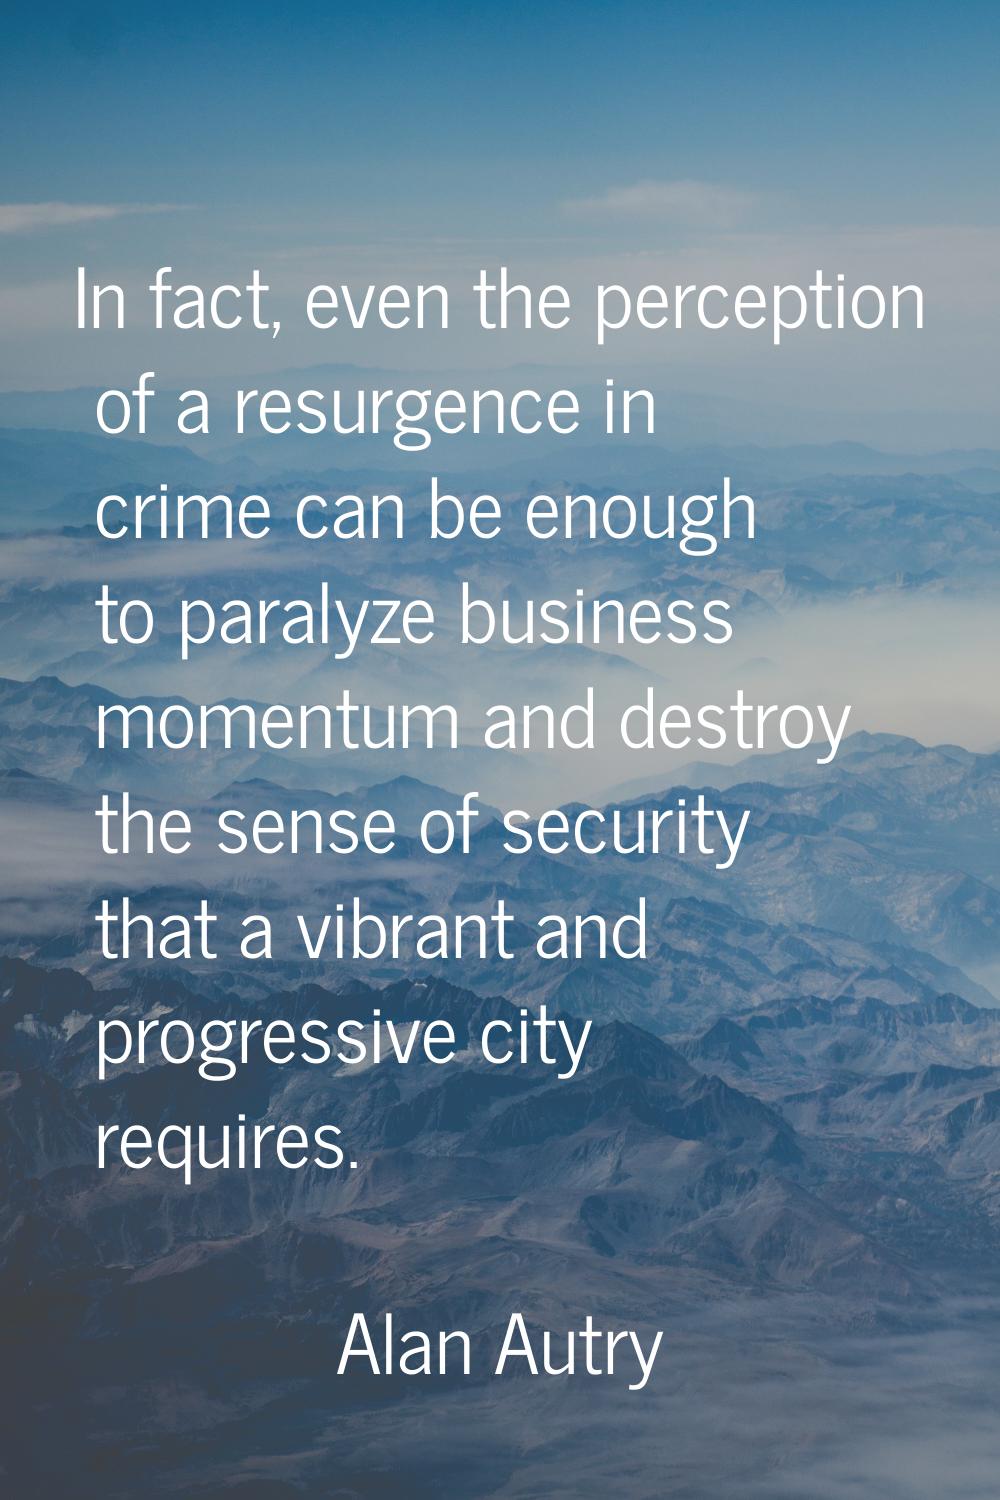 In fact, even the perception of a resurgence in crime can be enough to paralyze business momentum a